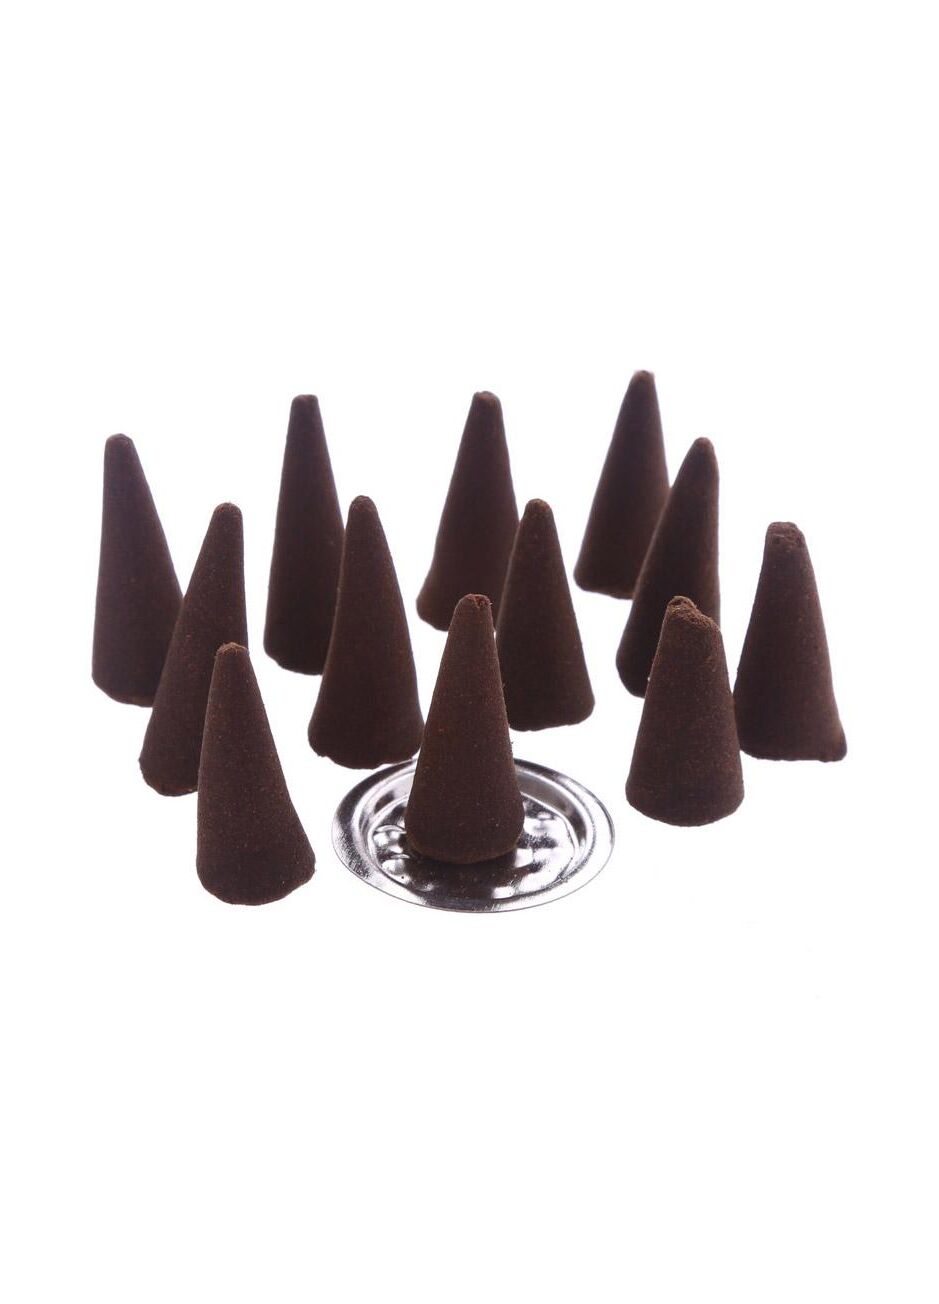 Gothic Gifts Vampire's Kiss Incense Cones - Kate's Clothing